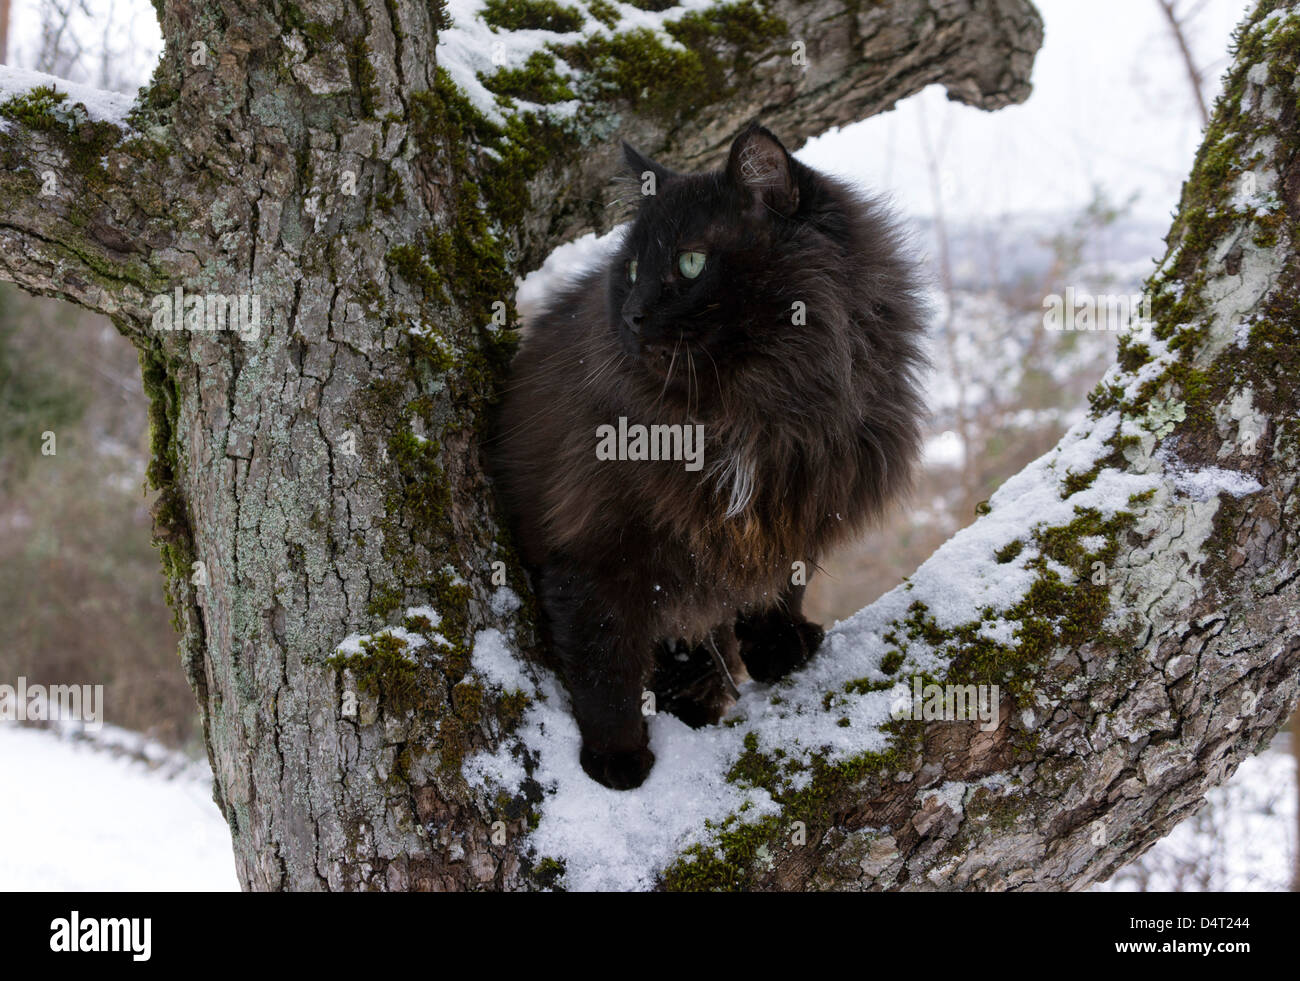 Black feral cat with green eyes sat on snowy branch Stock Photo